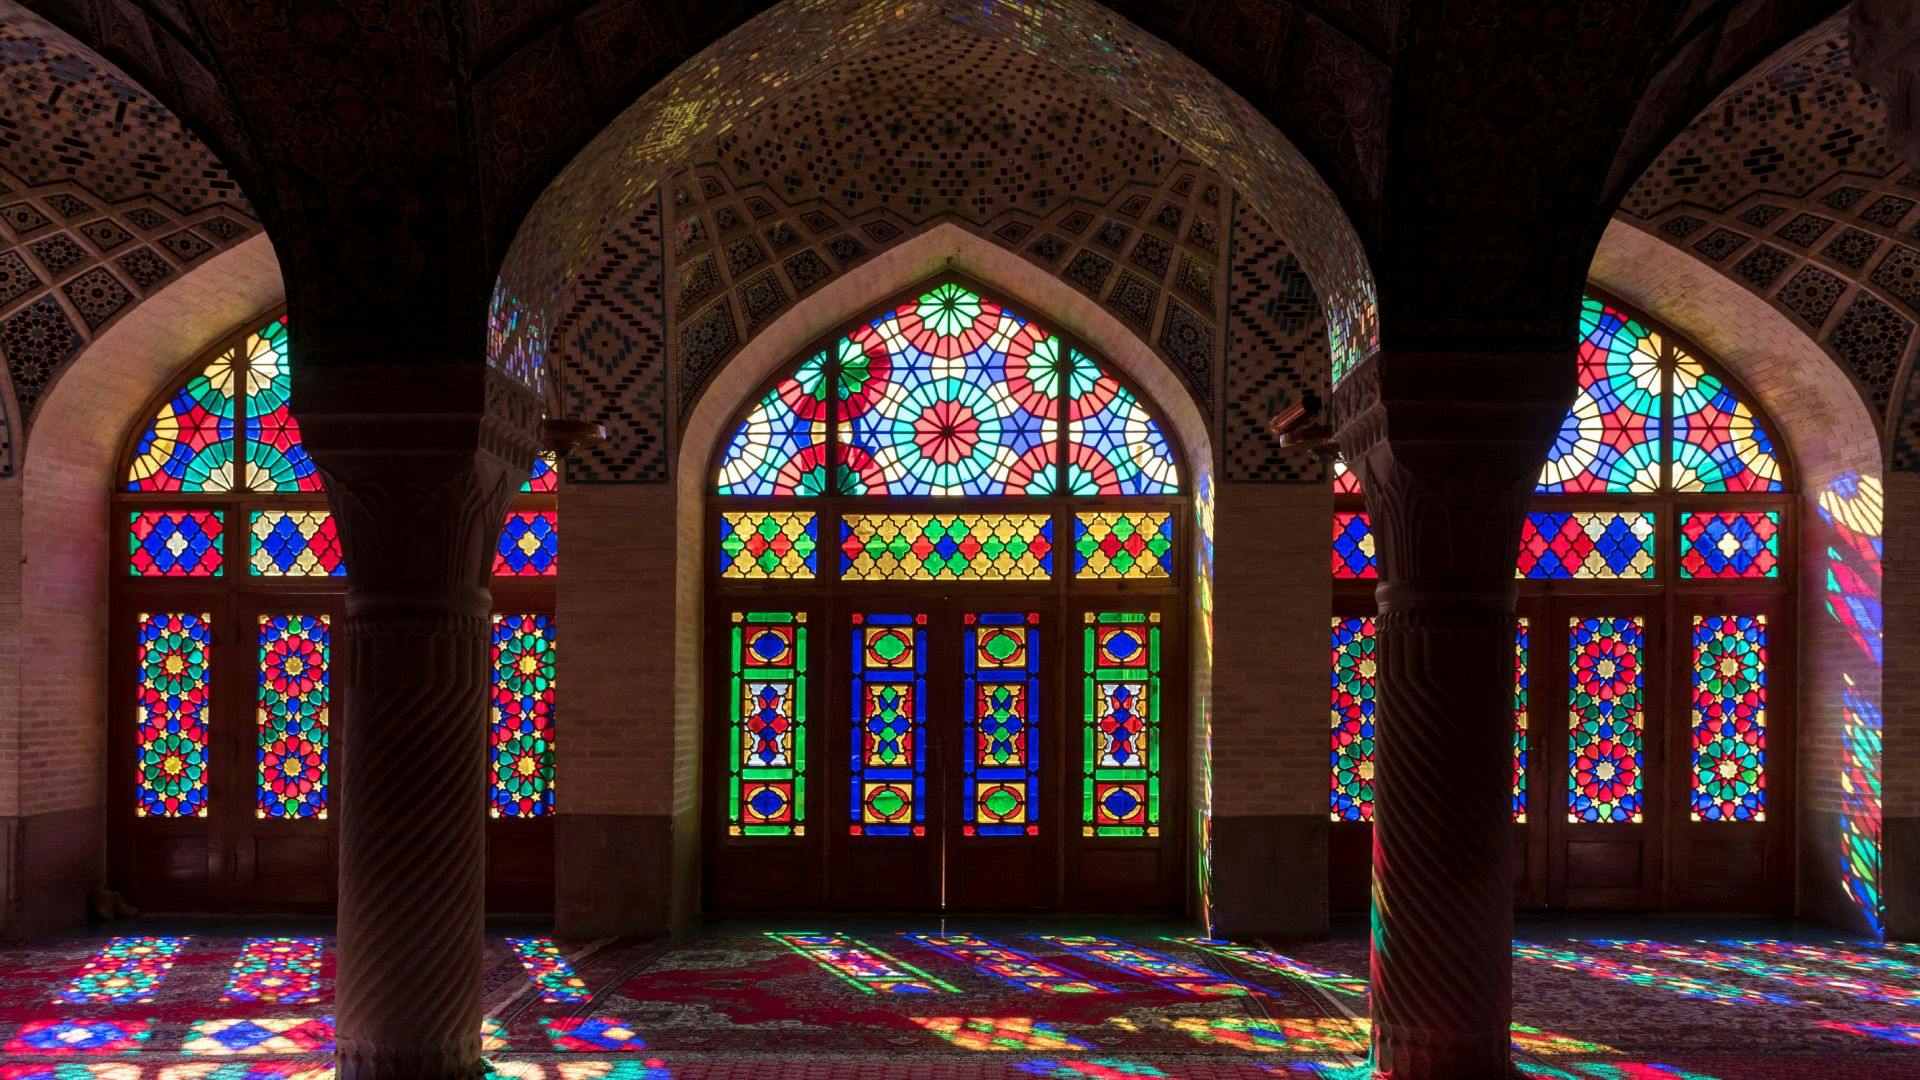 Interior stained glass windows in the Pink Mosque